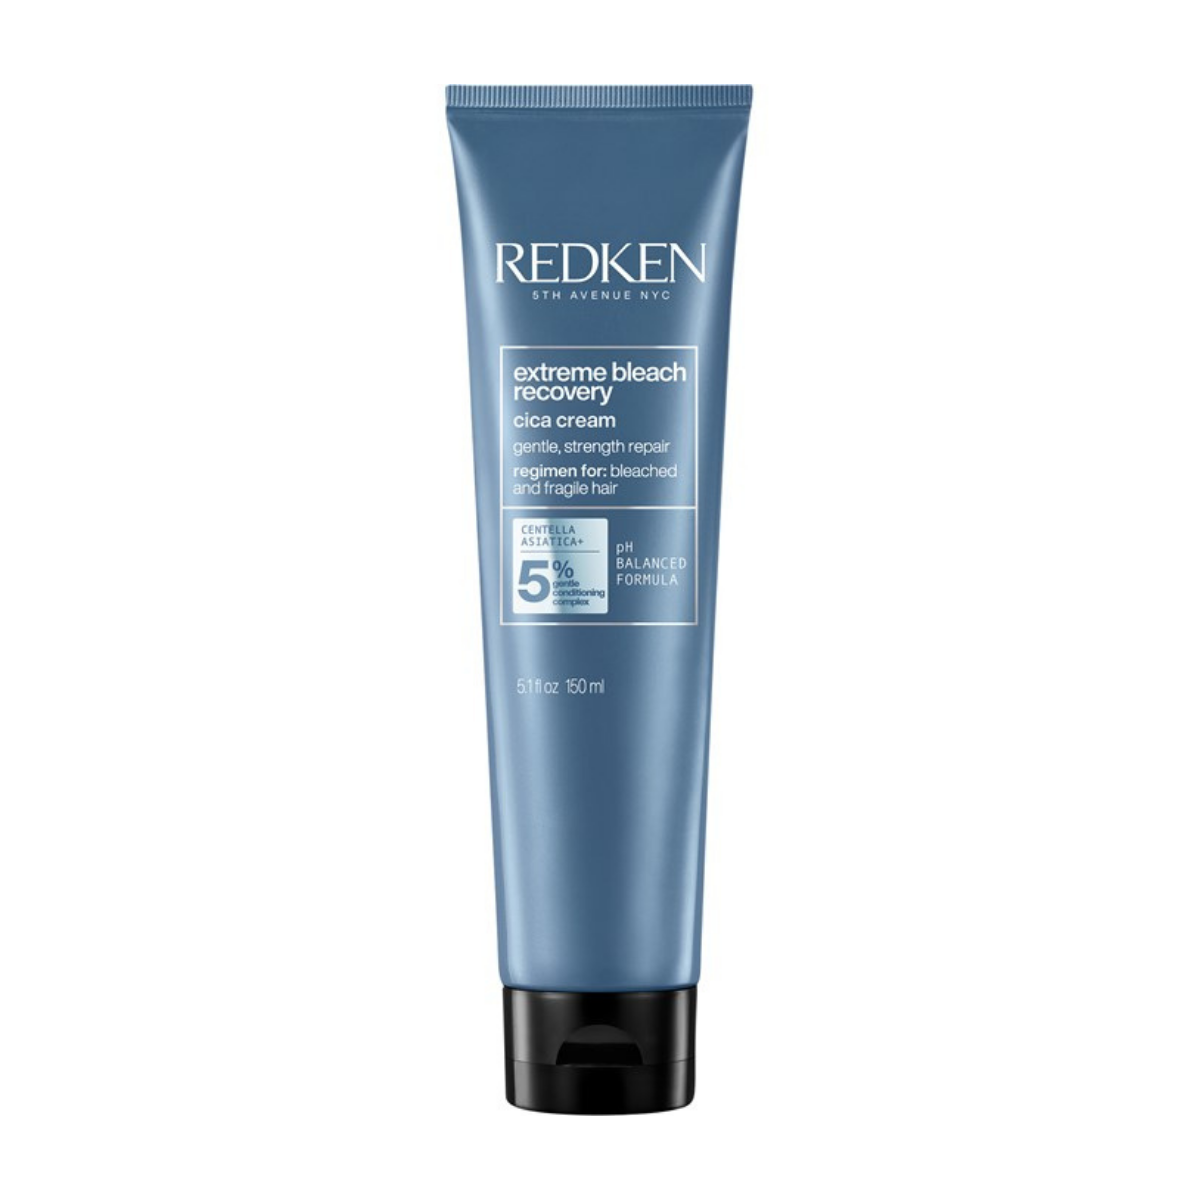 Redken Extreme Bleach Recovery Cica Cream.